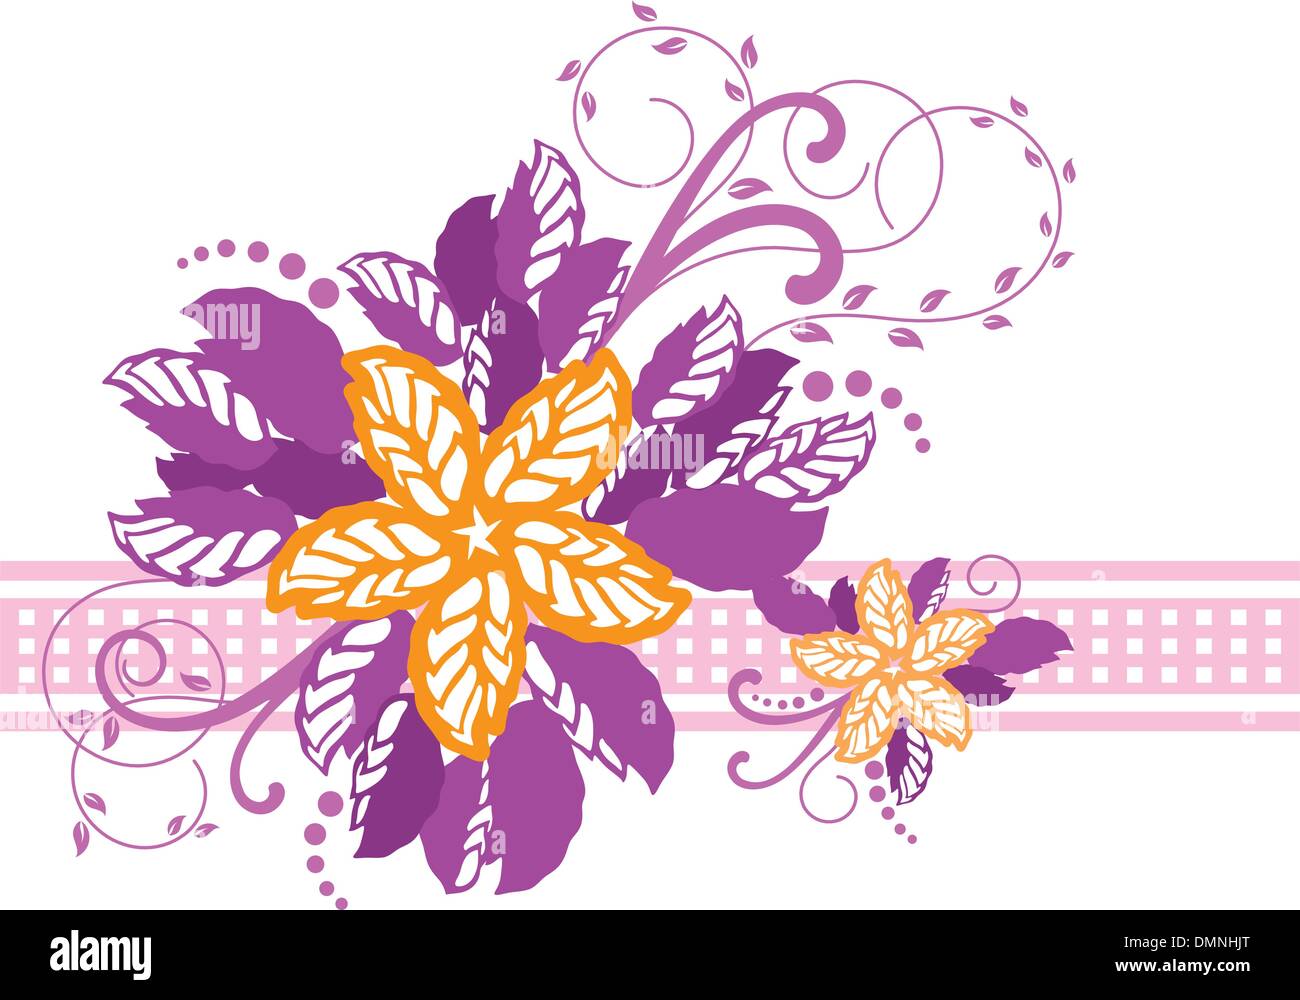 Pink and yellow floral banner Stock Vector